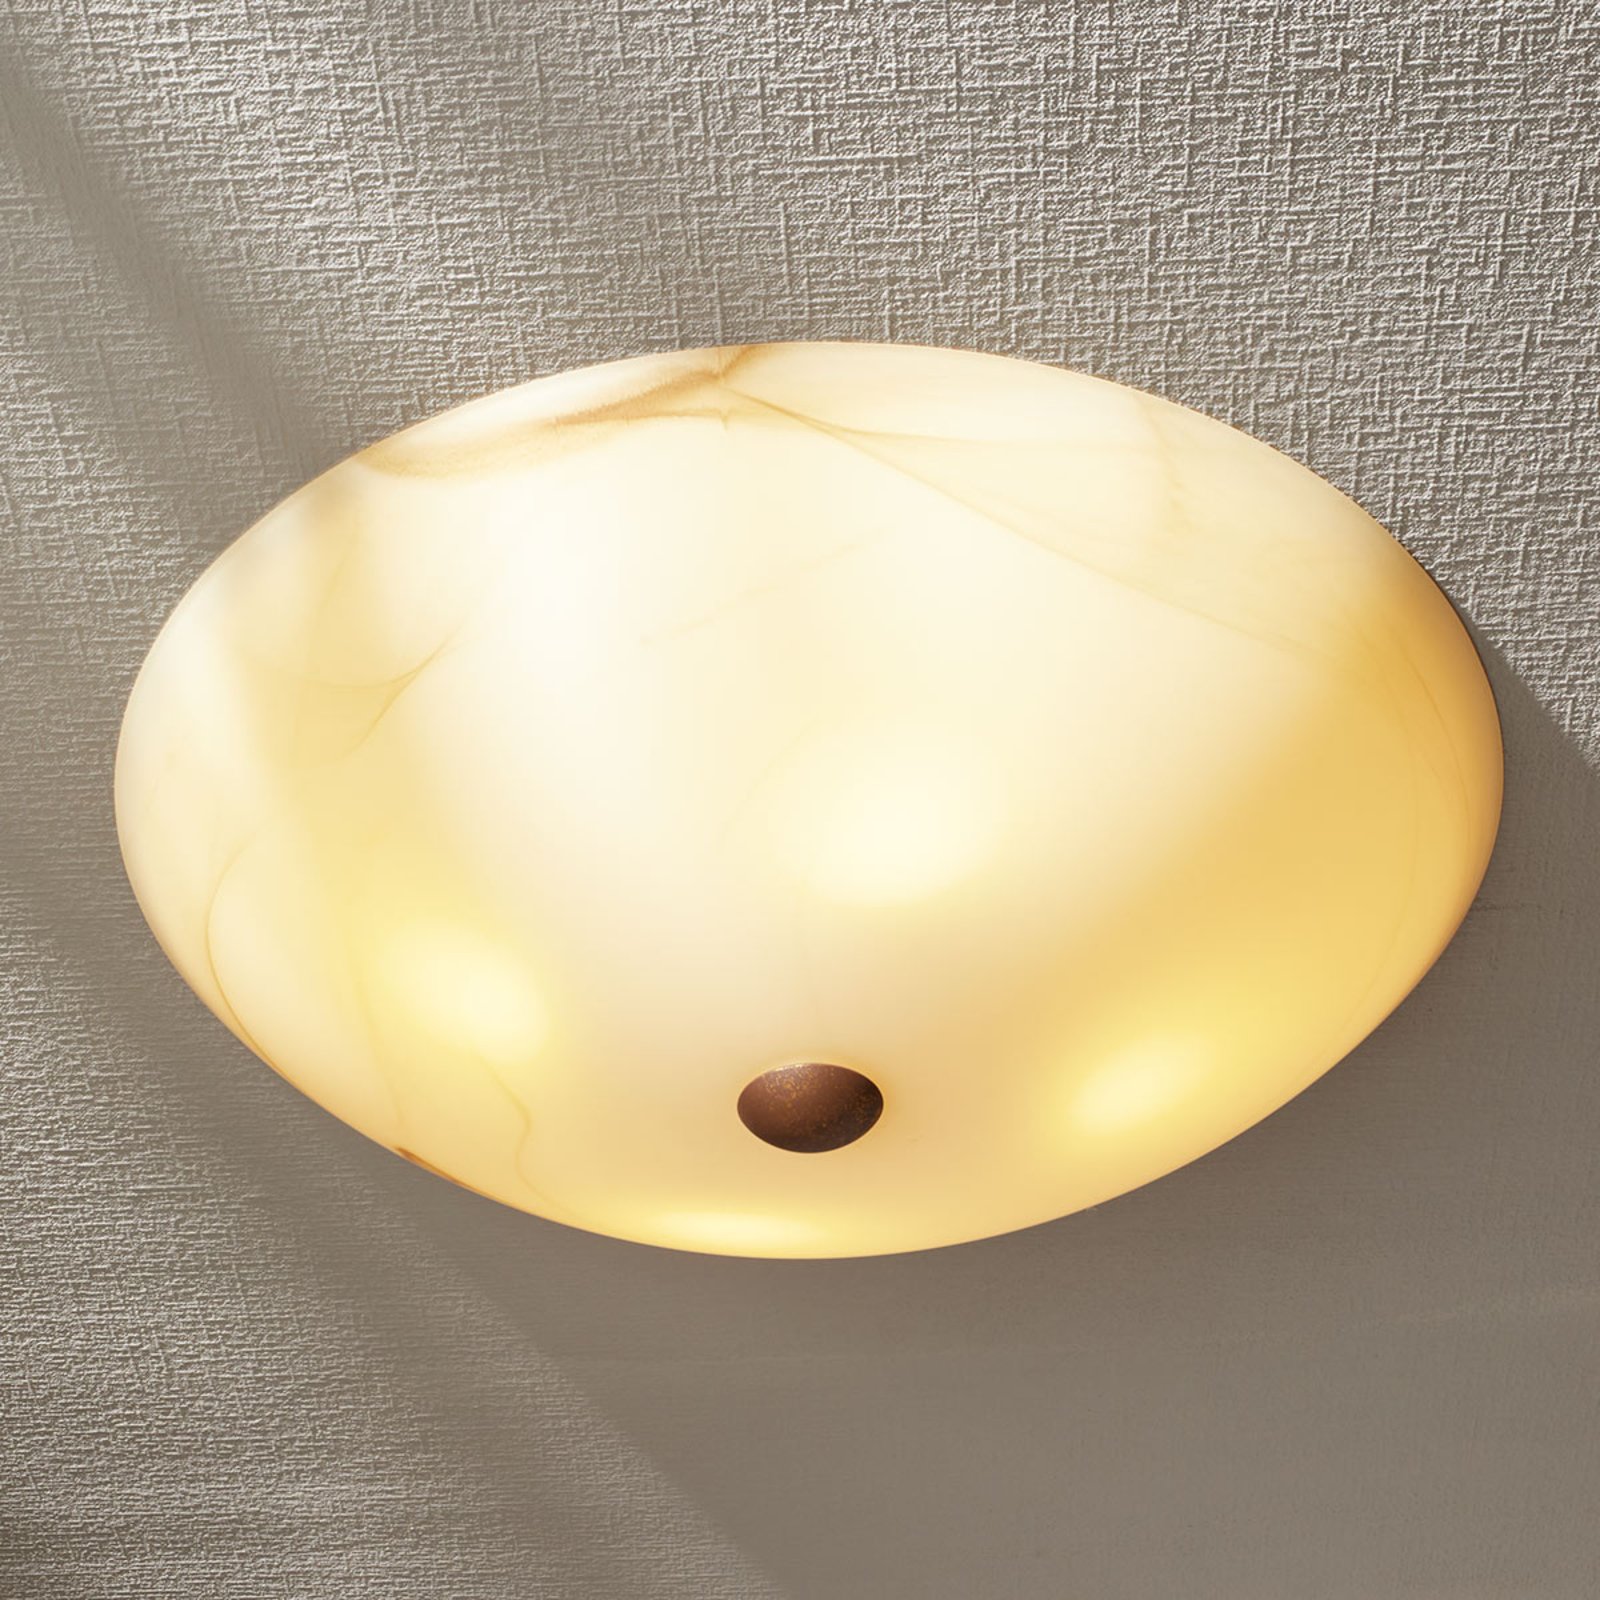 Round ceiling light Mattia with glass lampshade